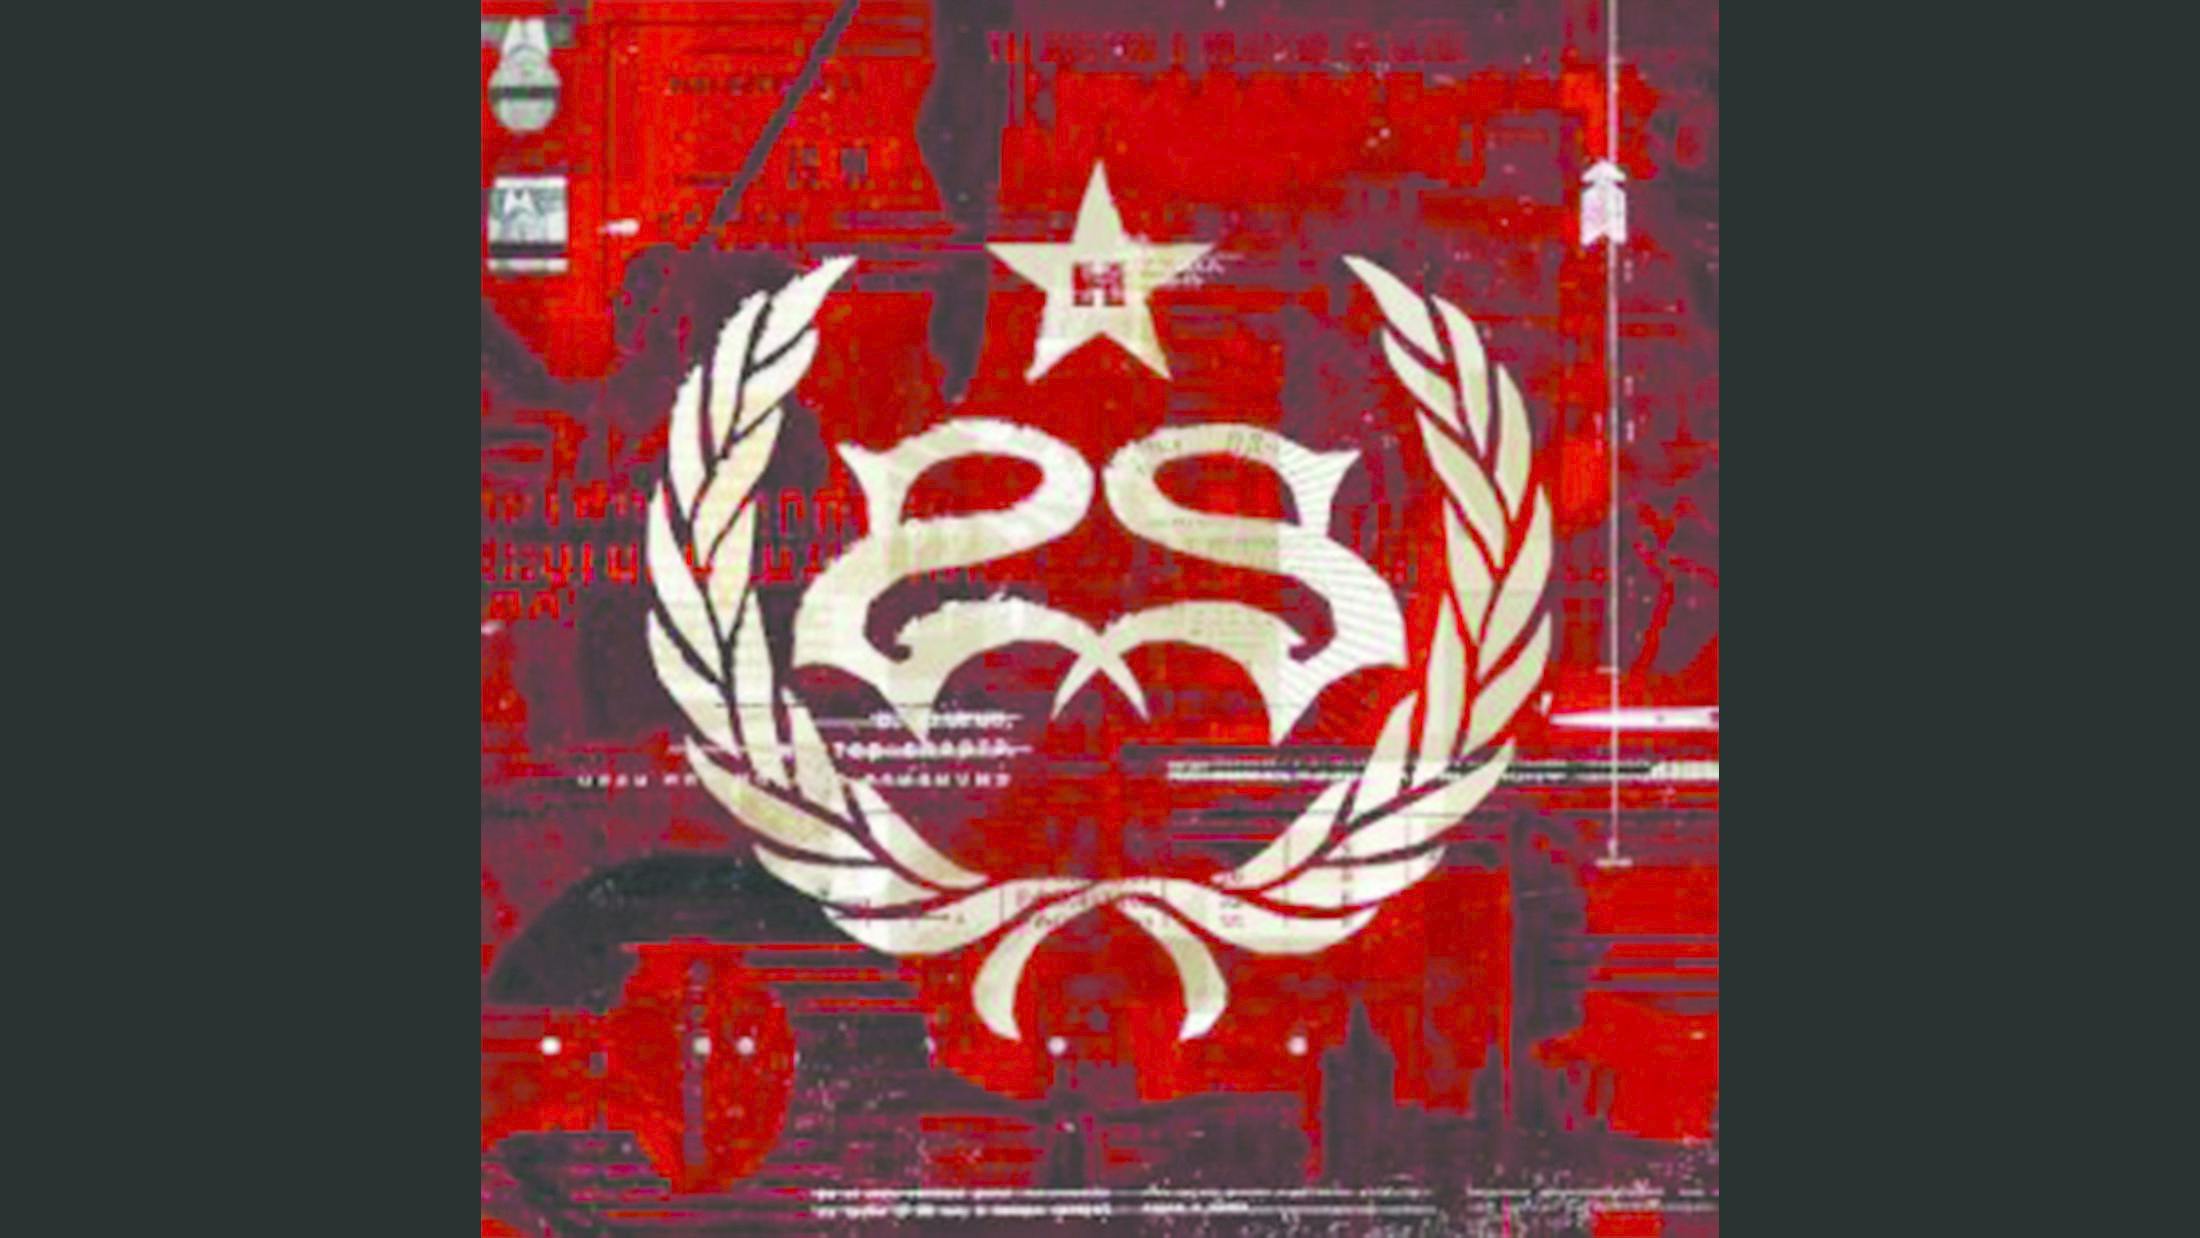 The title of this sixth album came from Corey Taylor misreading a sign in an airport. There was no mistaking the intent of the resulting record, though. With Slipknot taking time out, and Stone Sour having previously released two covers EPs, Hydrograd was the sound of a band happily back in business.